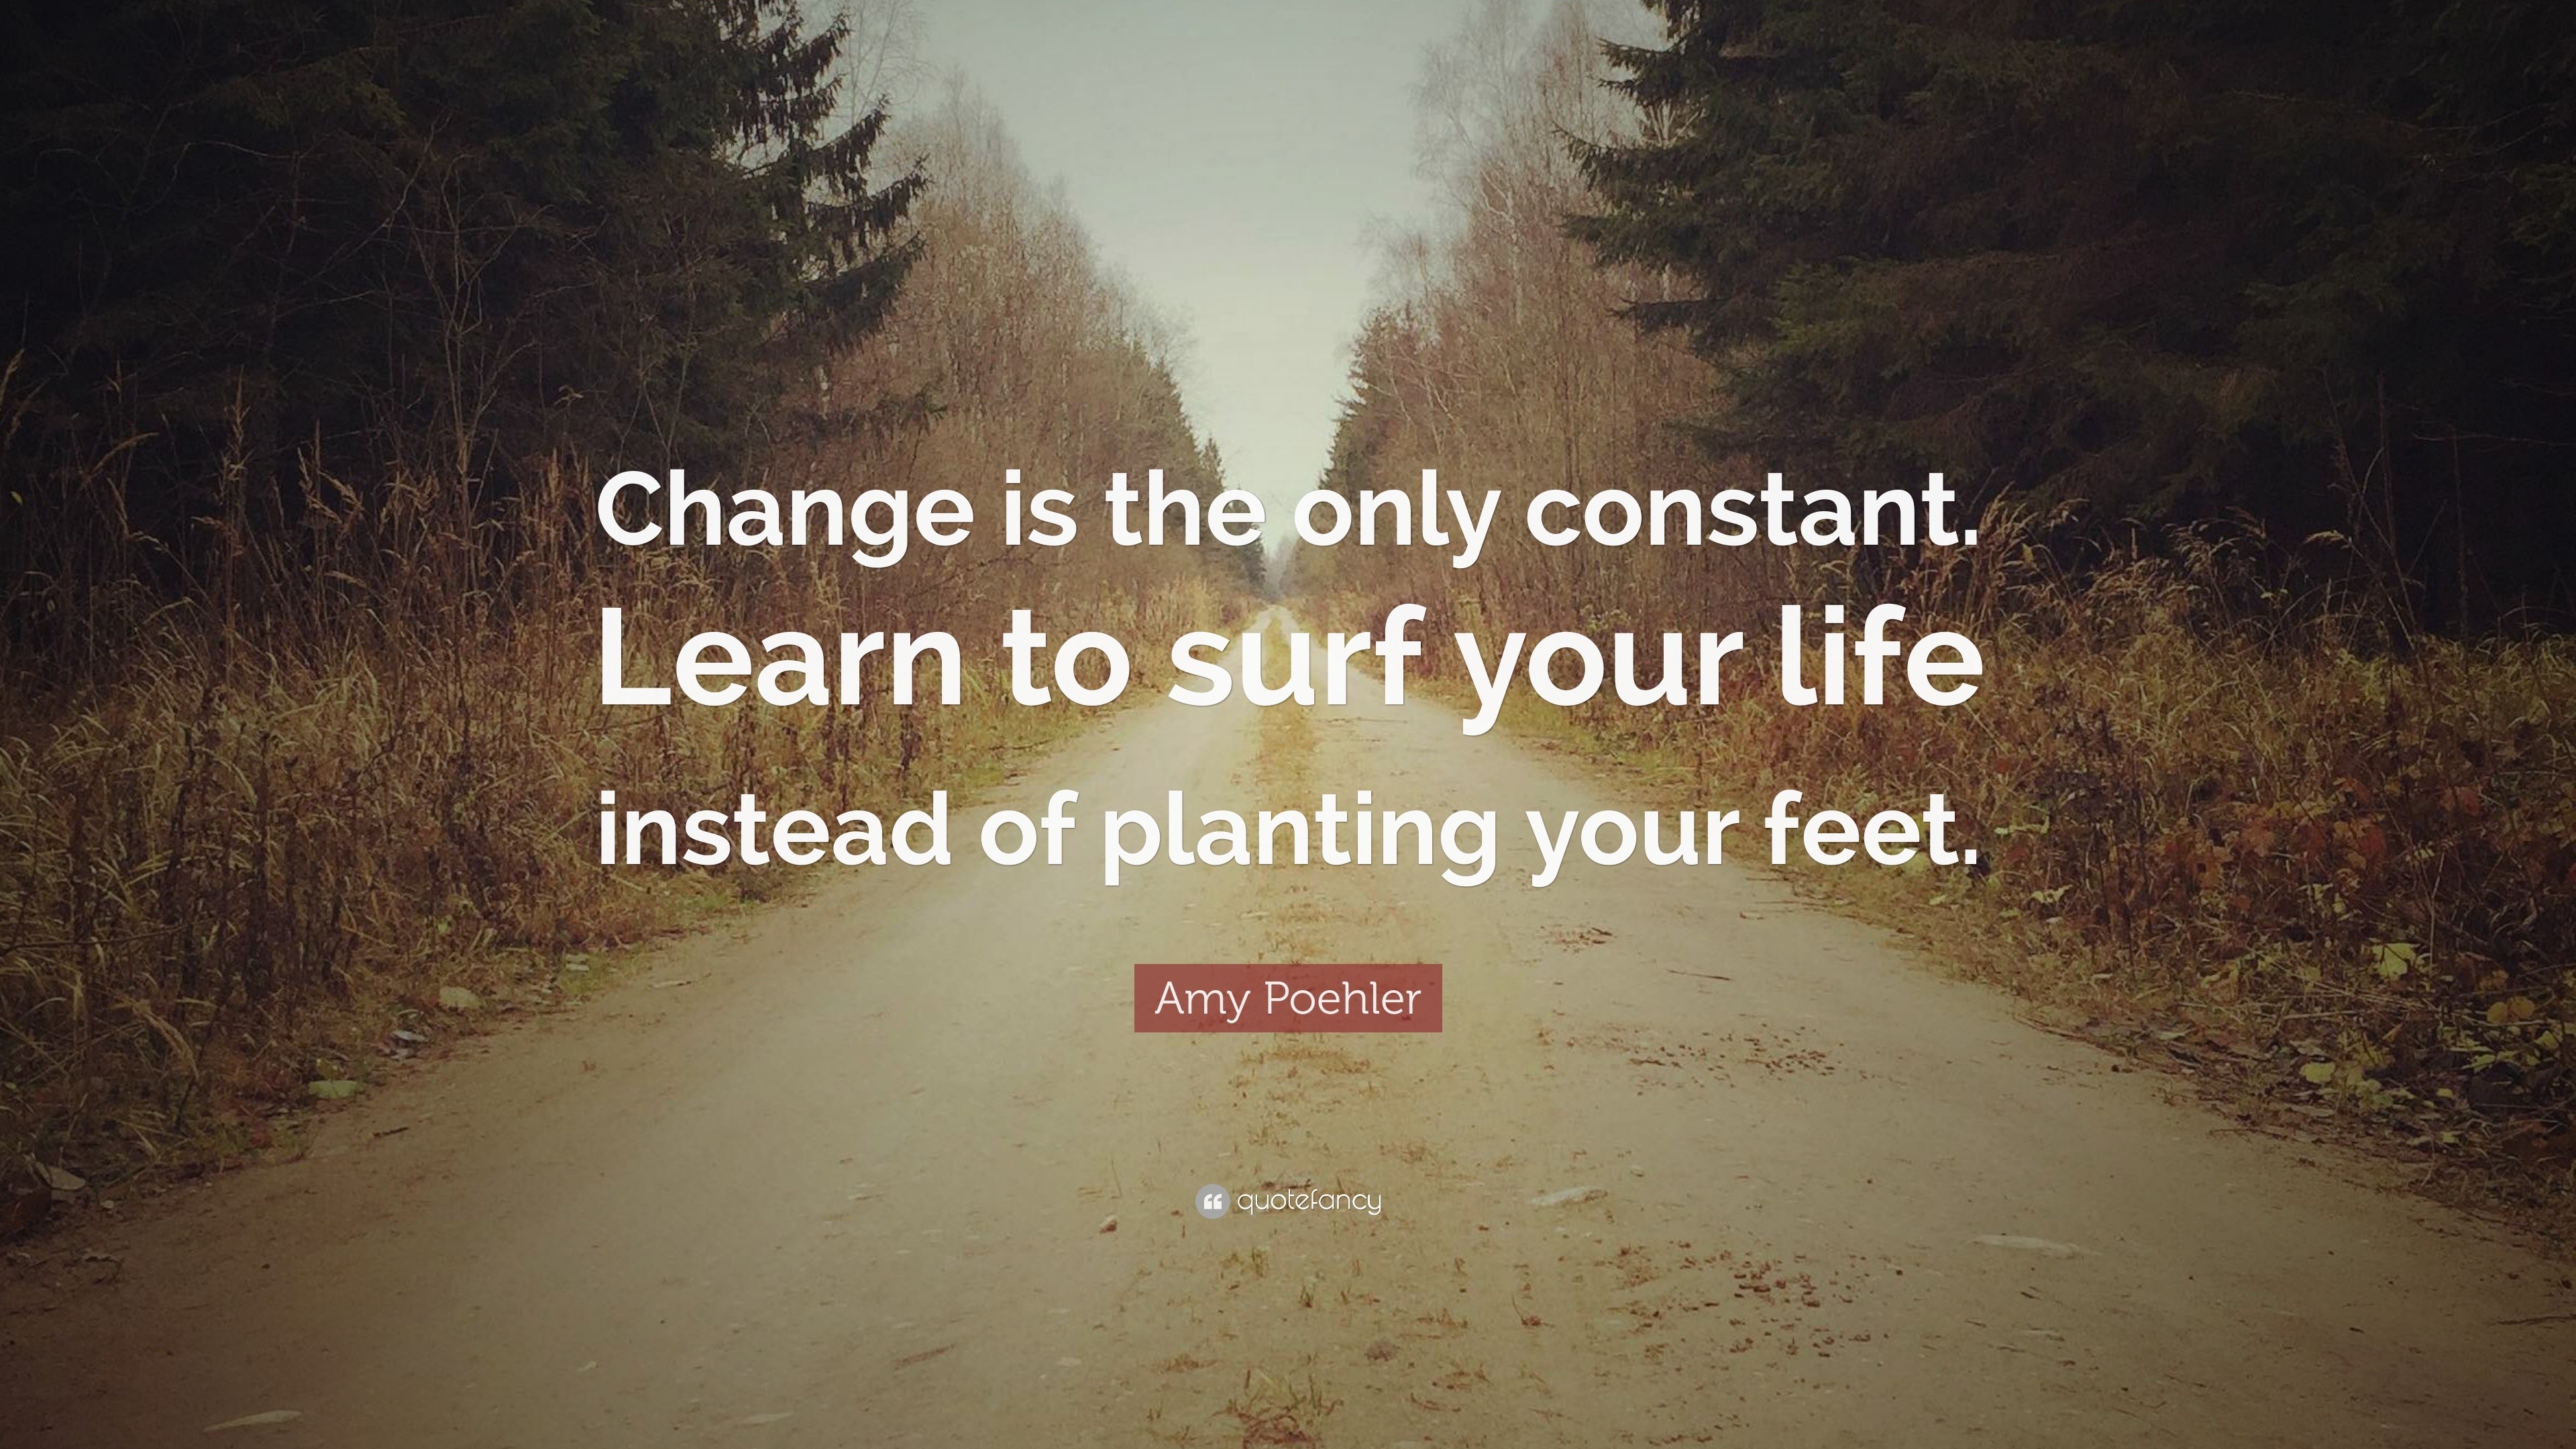 Amy Poehler Quote “Change is the only constant Learn to surf your life